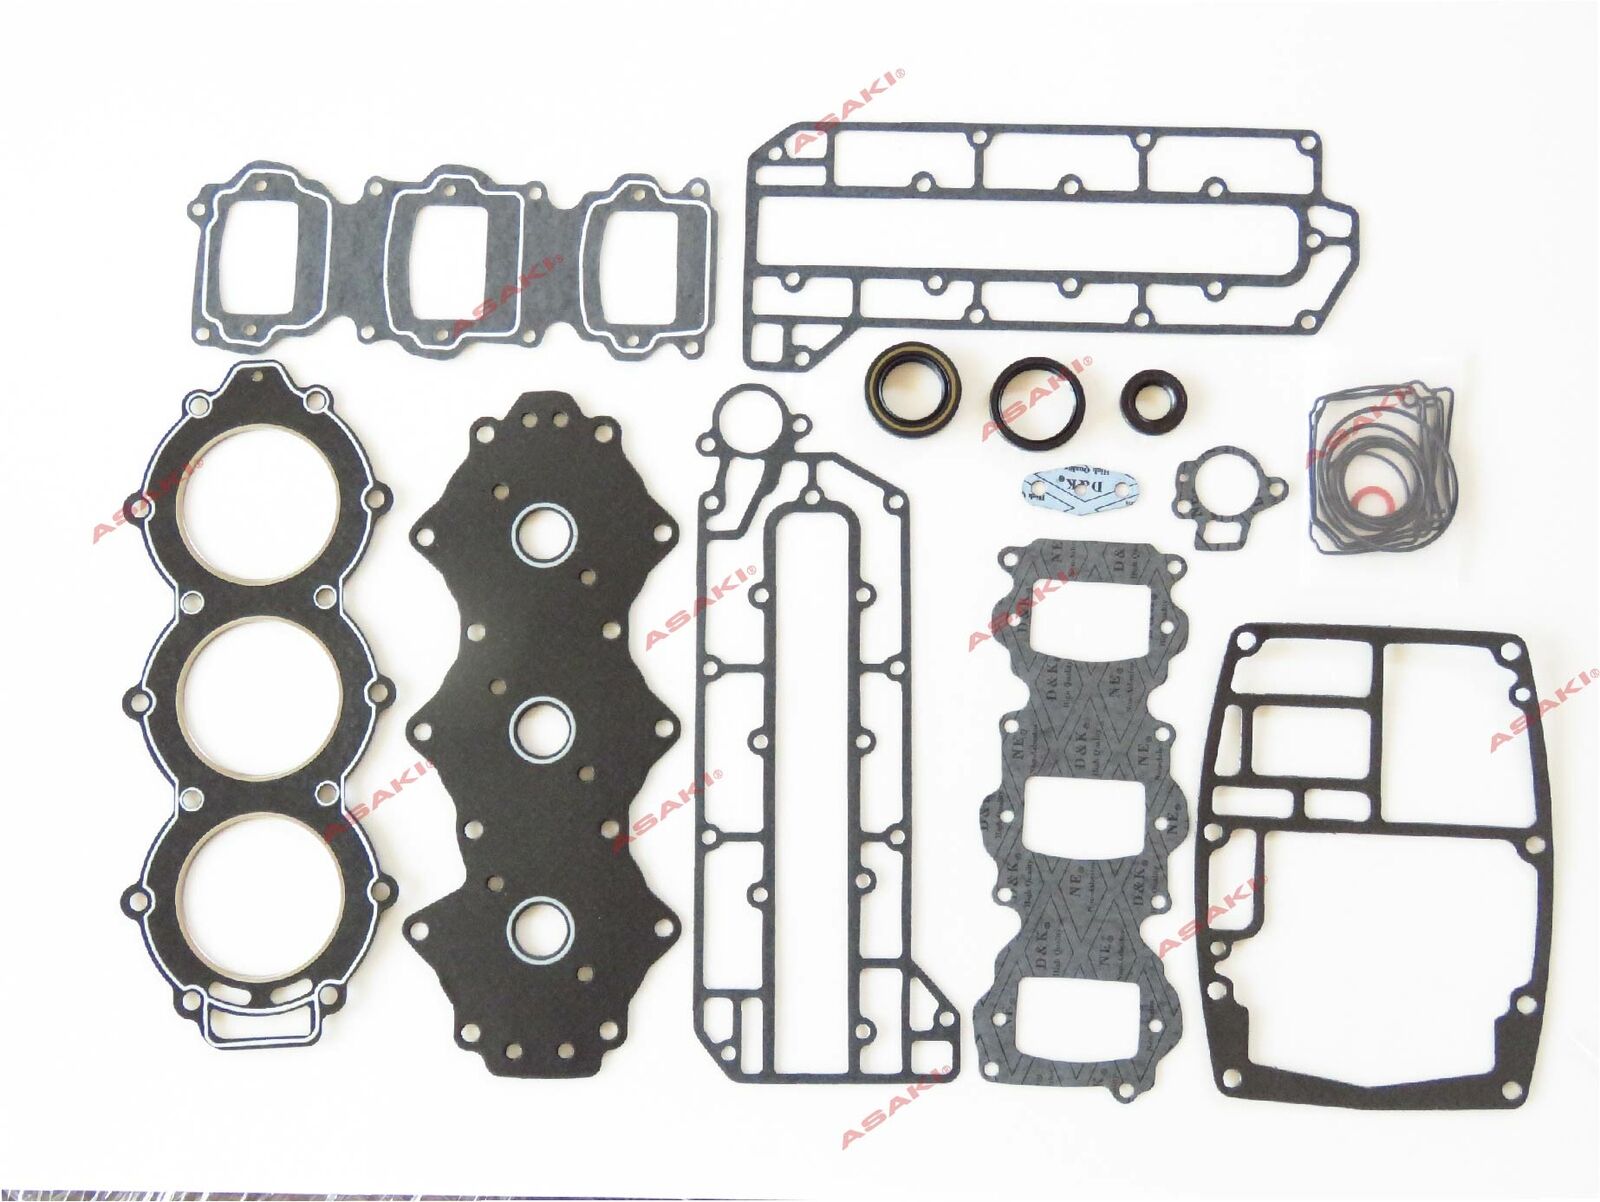 For YAMAHA Outboard 60 70 HP 70TLR/P60TLHS Power Head Gasket Kit 6H3-W0001-02-00